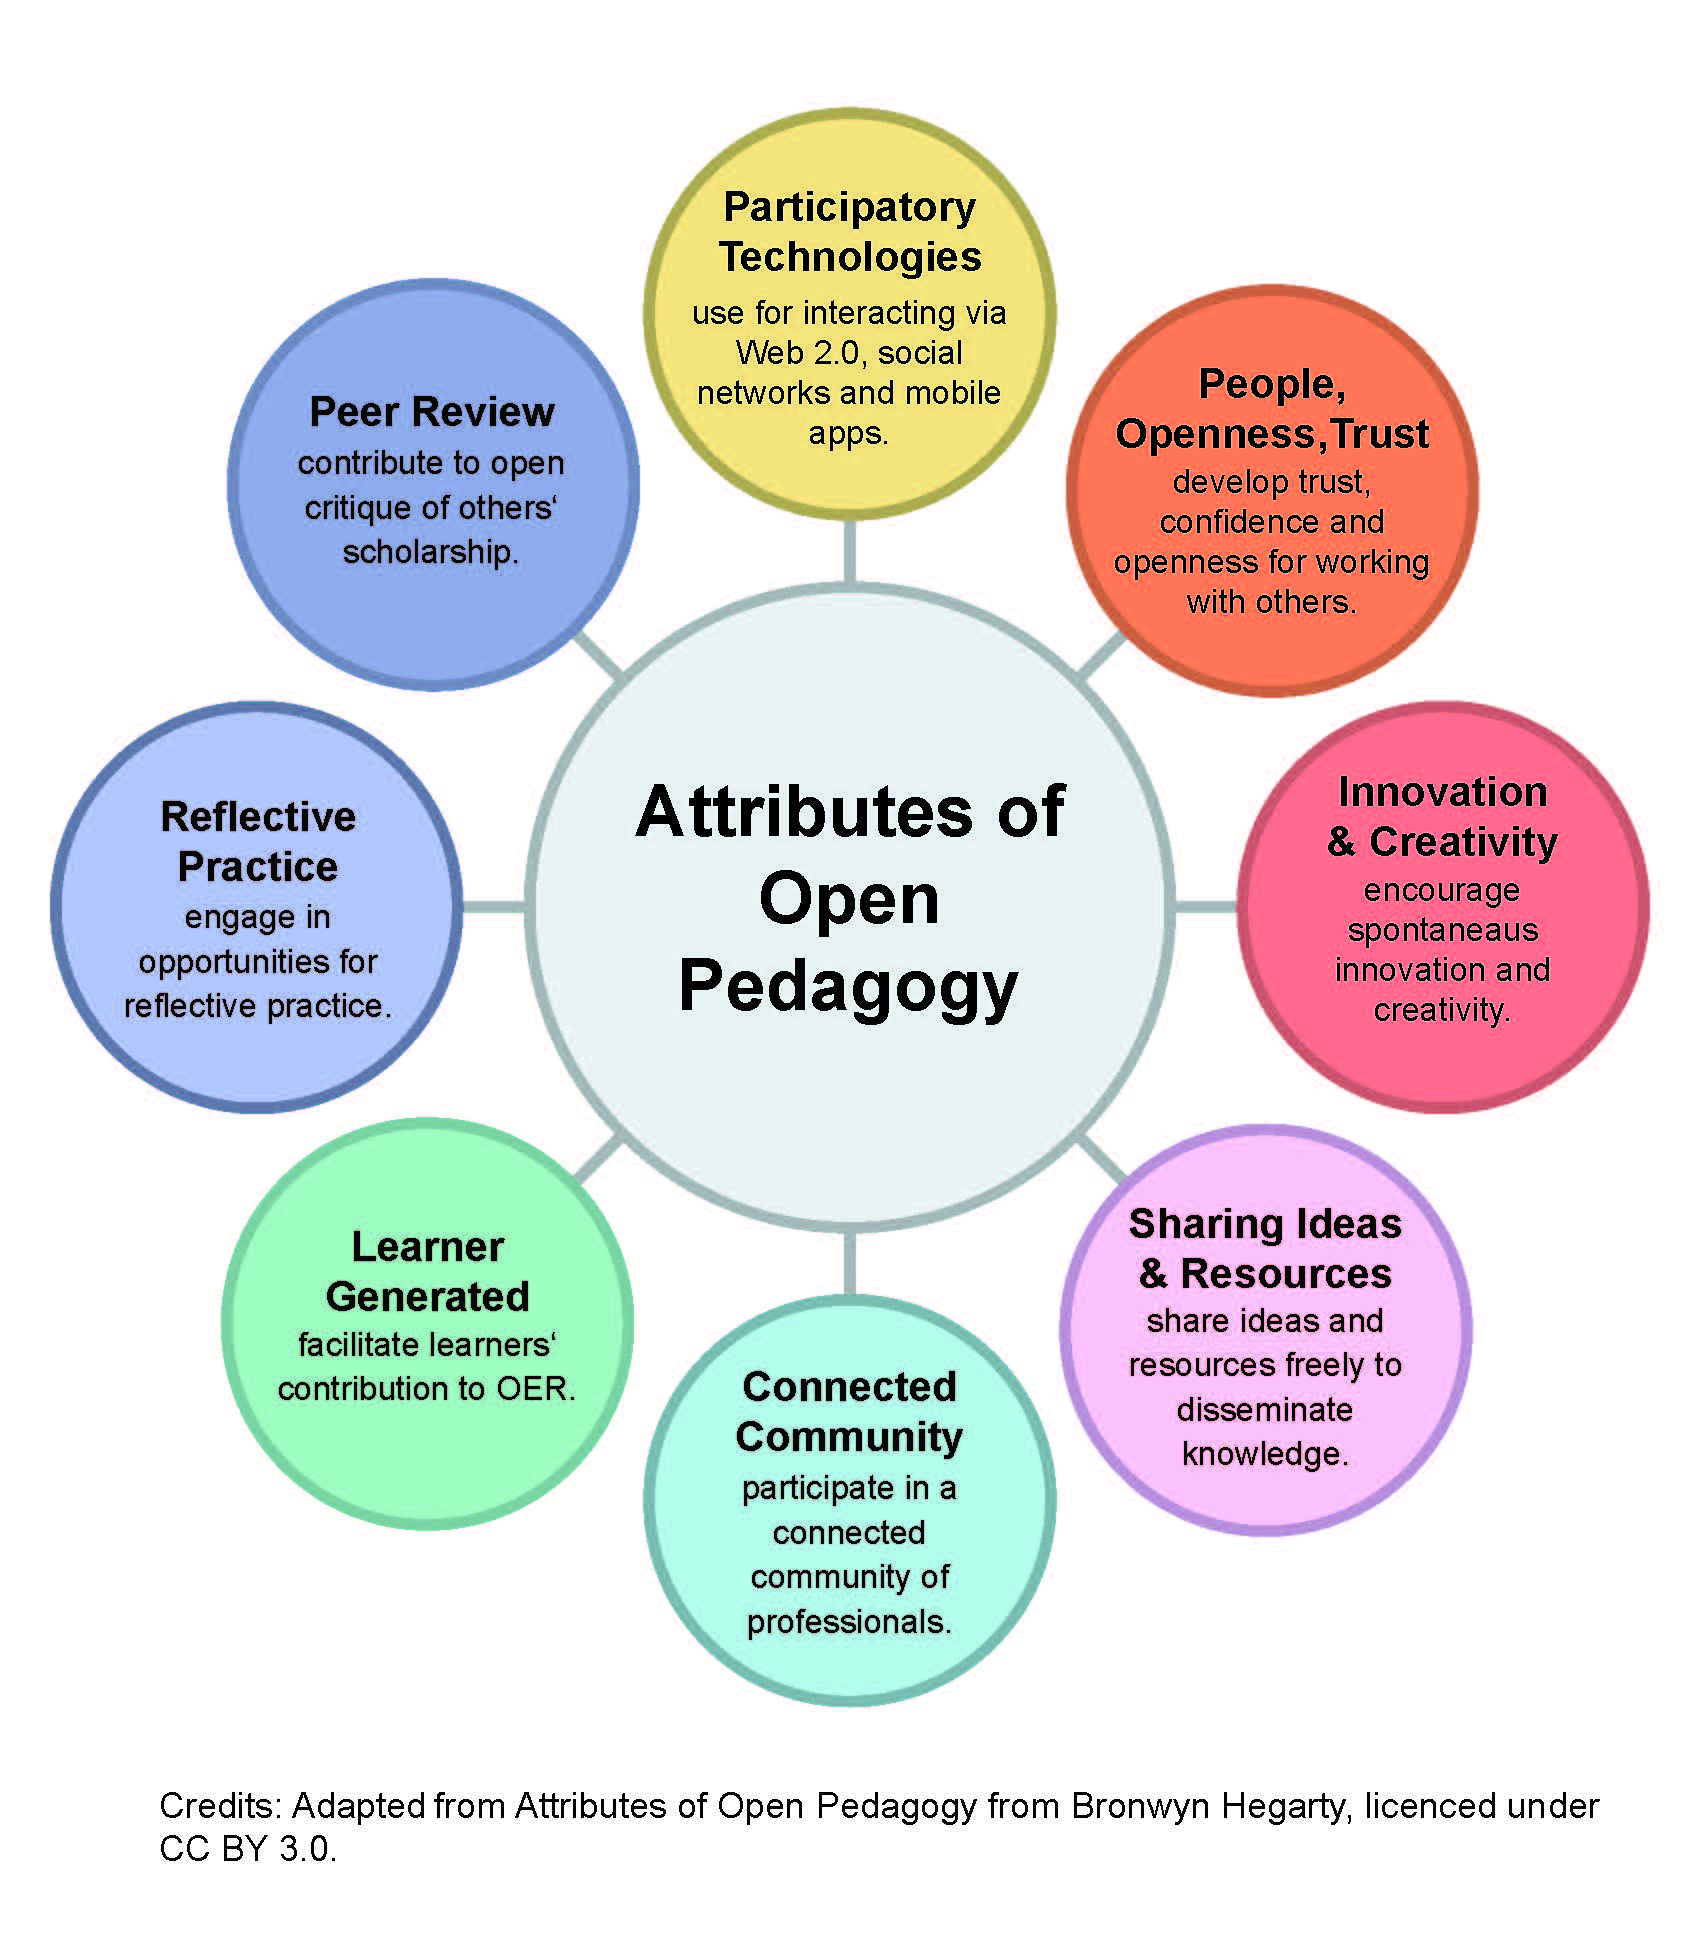 OER Attributes - text only information follows